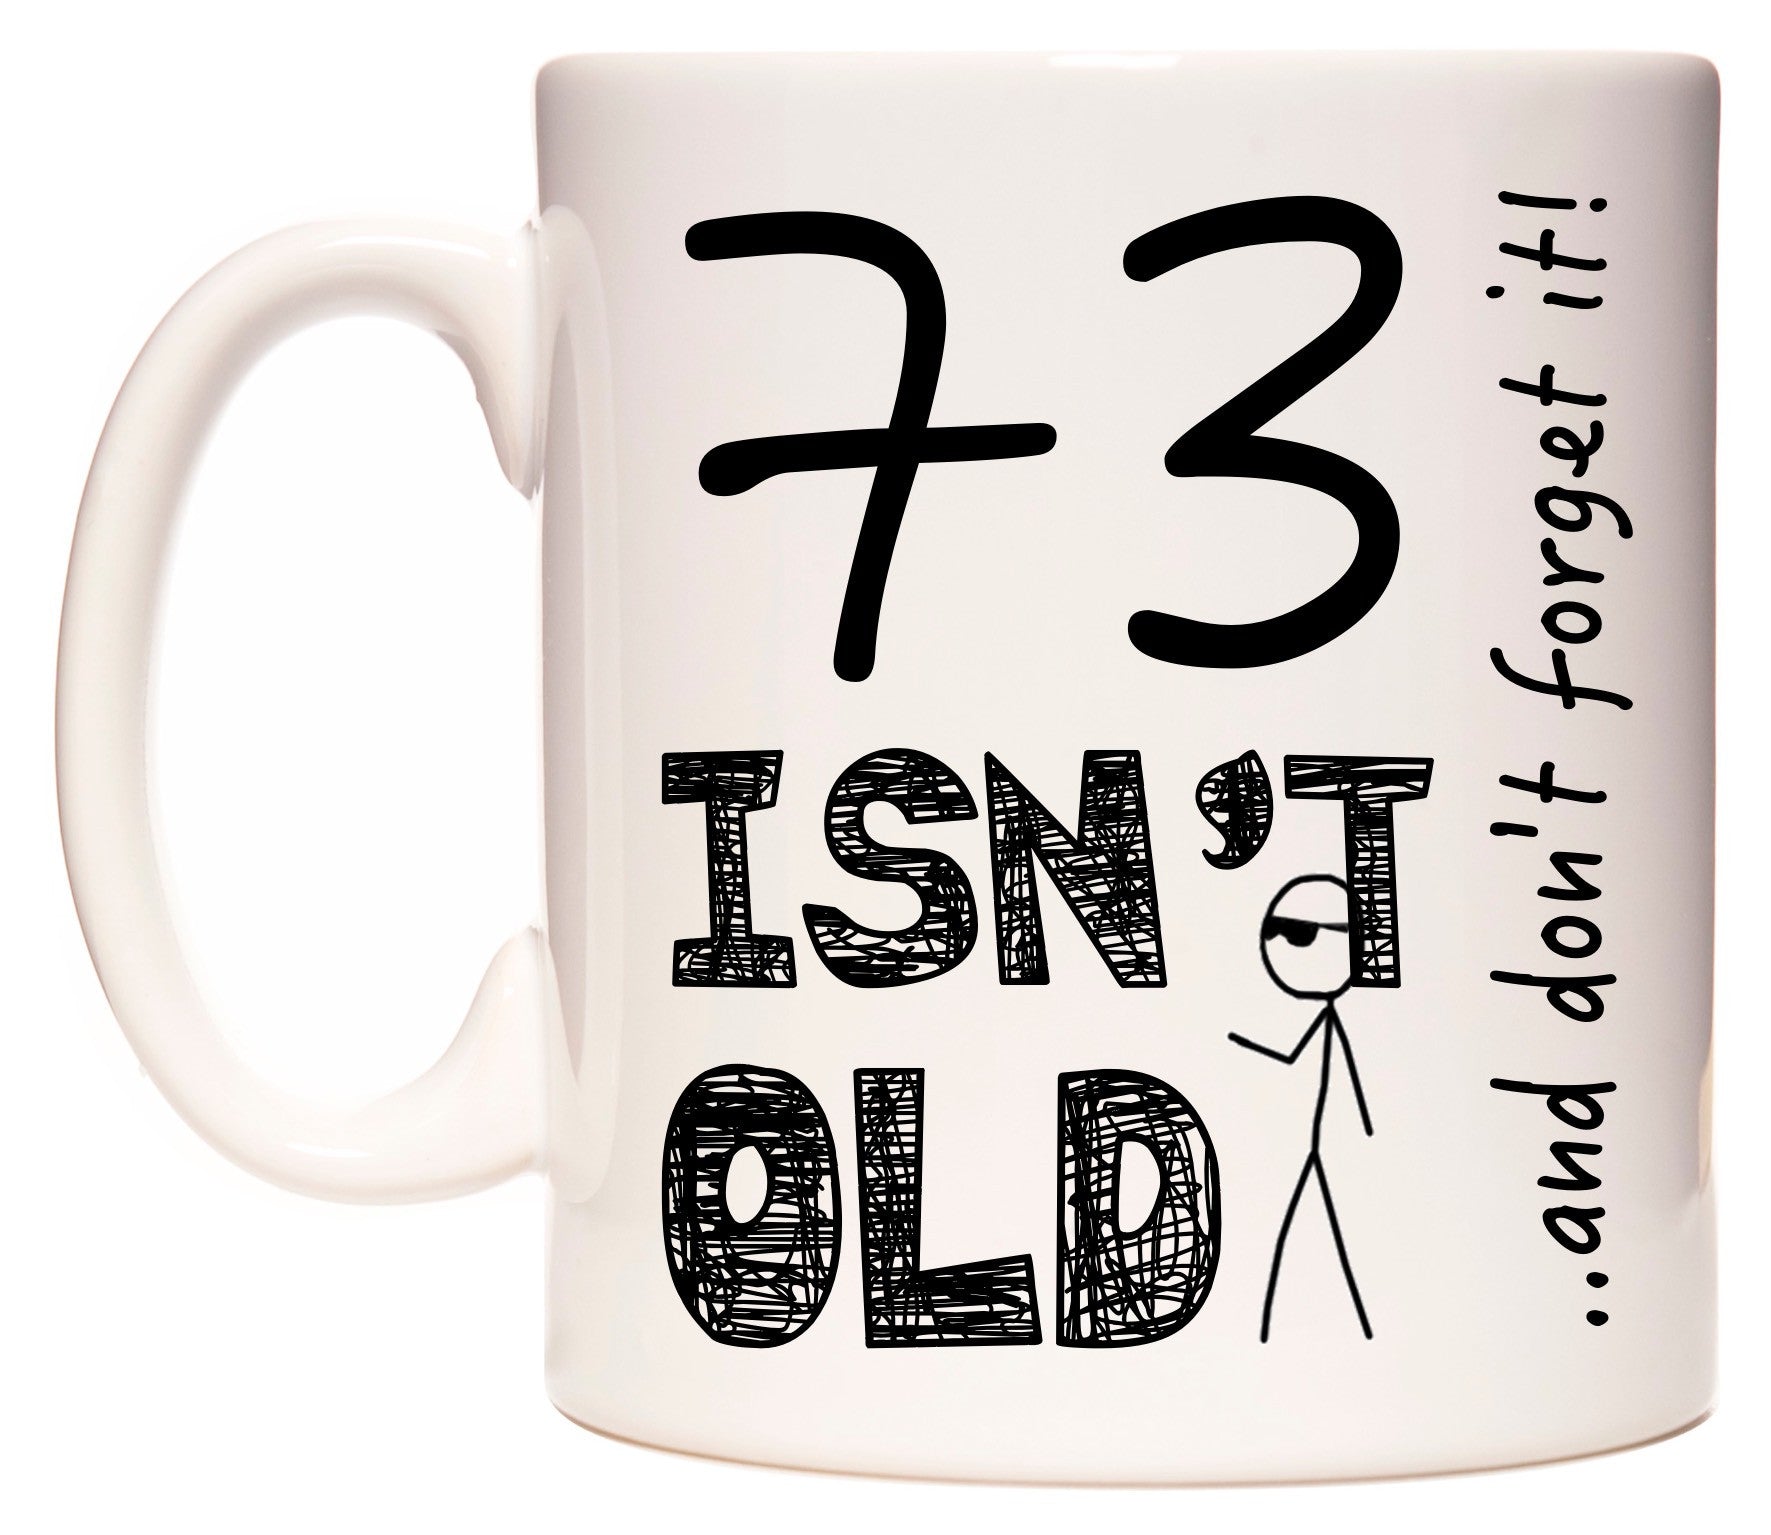 This mug features 73 Isn't Old